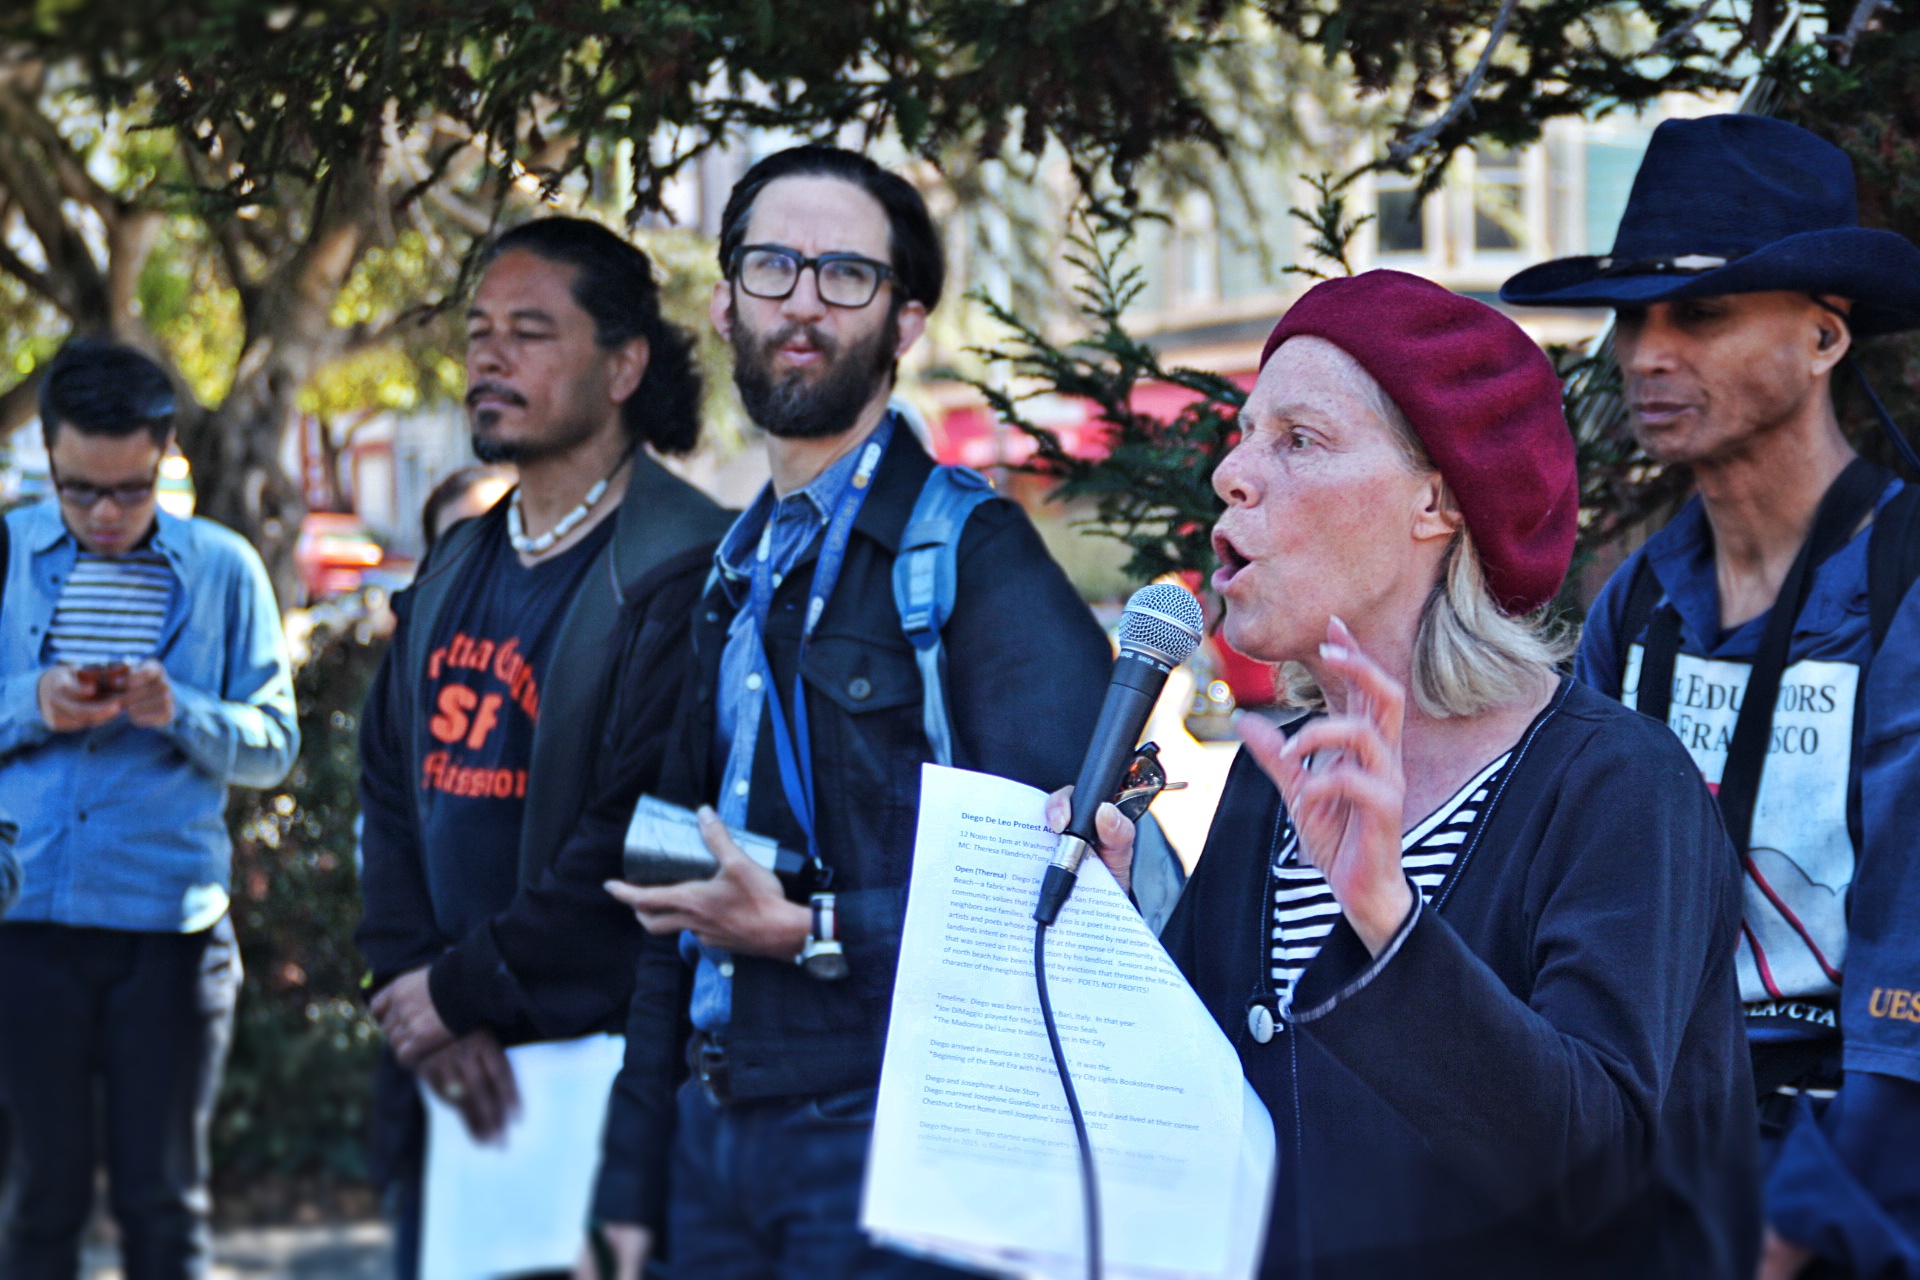 Theresa Flandrich speaks at a rally protesting the eviction of Diego Deleo at Washington Square Park in July. Photo by Sana Saleem. 